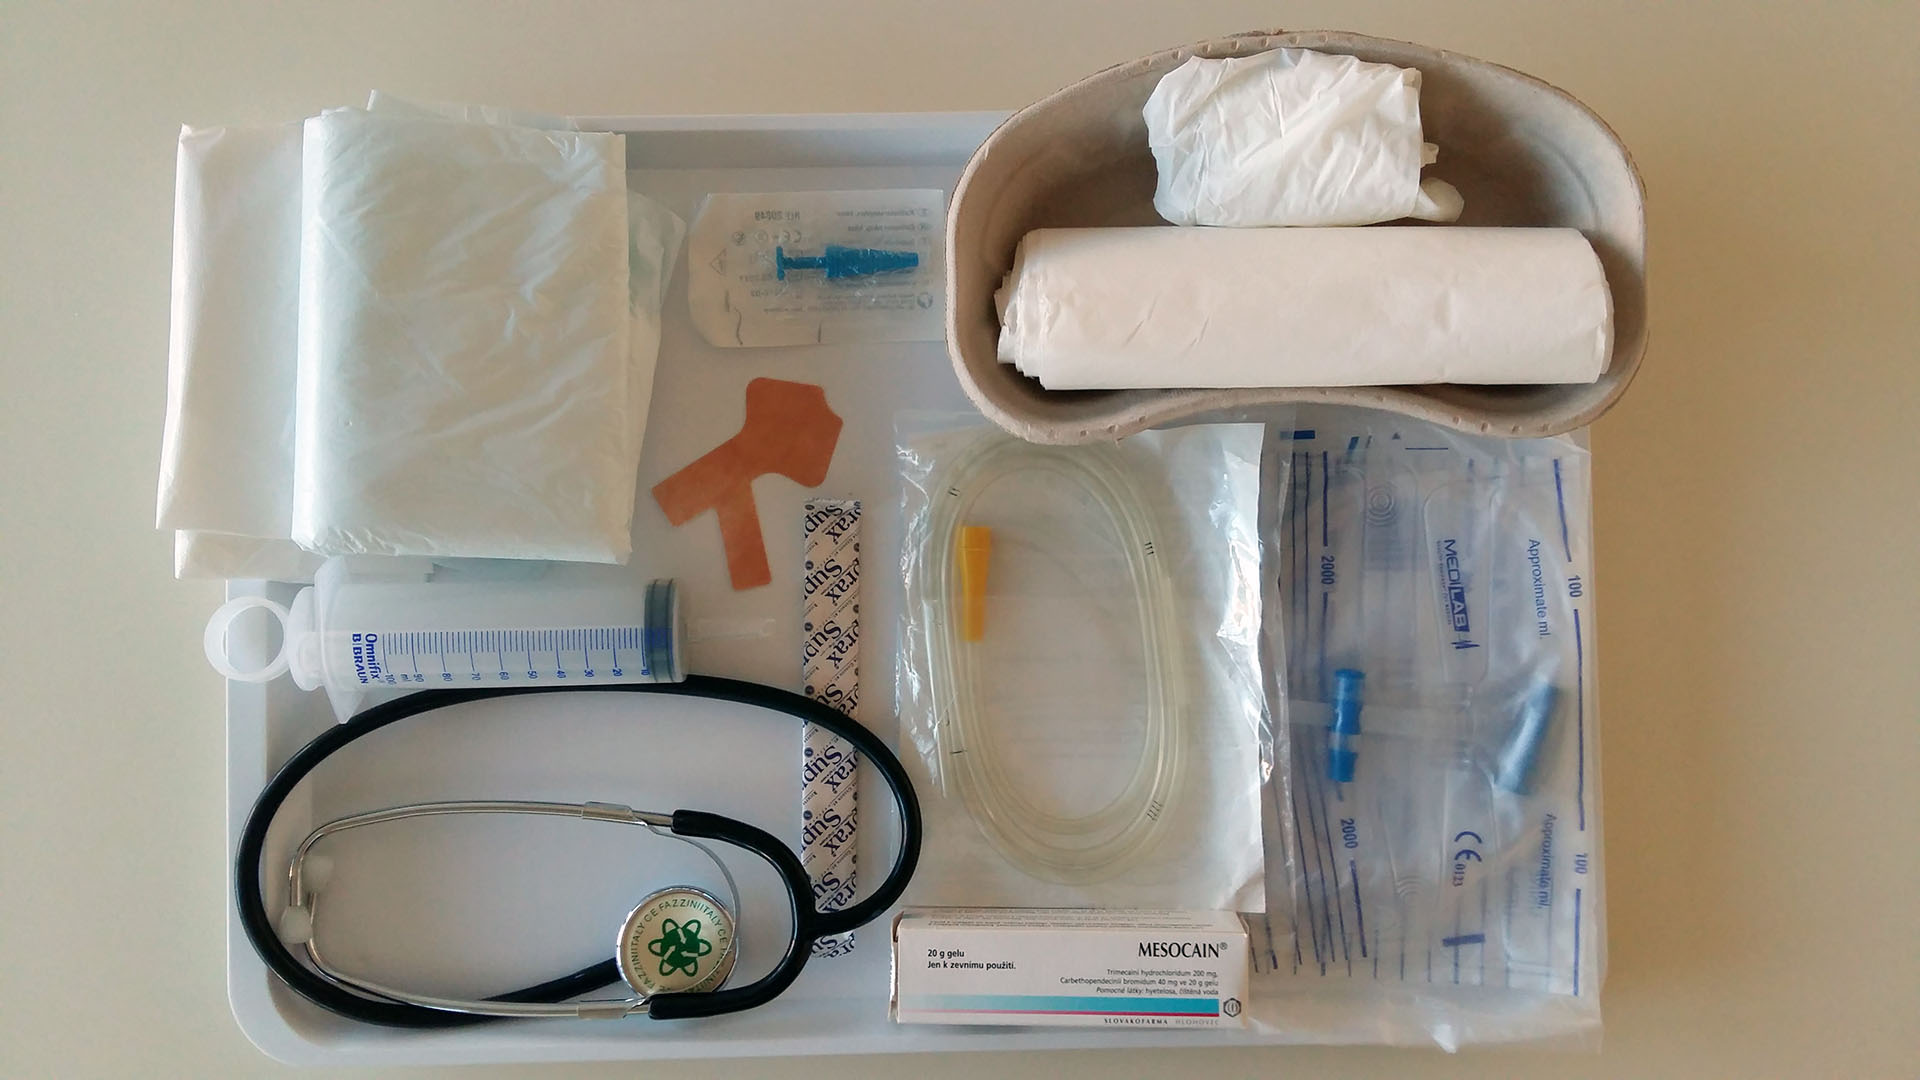 Equipment for NG tube insertion (do not store the equipment in a kidney dish)